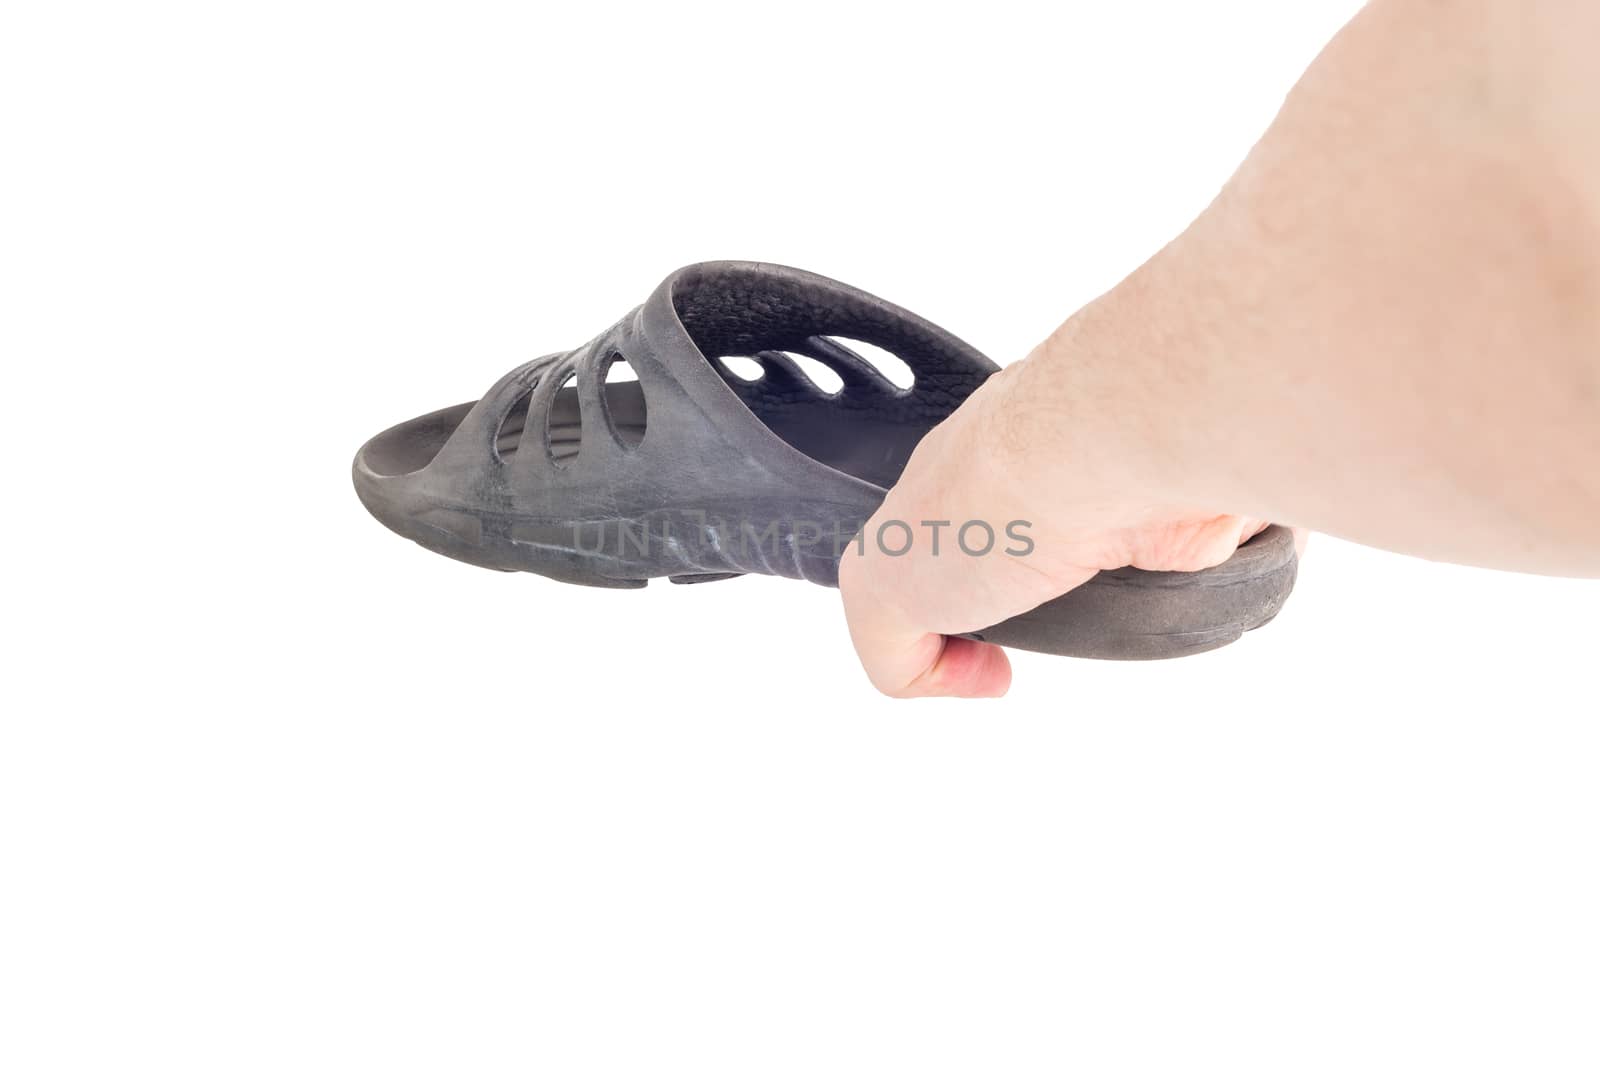 caucasian hand holding black rubber slipper like weapon against cockroach by z1b